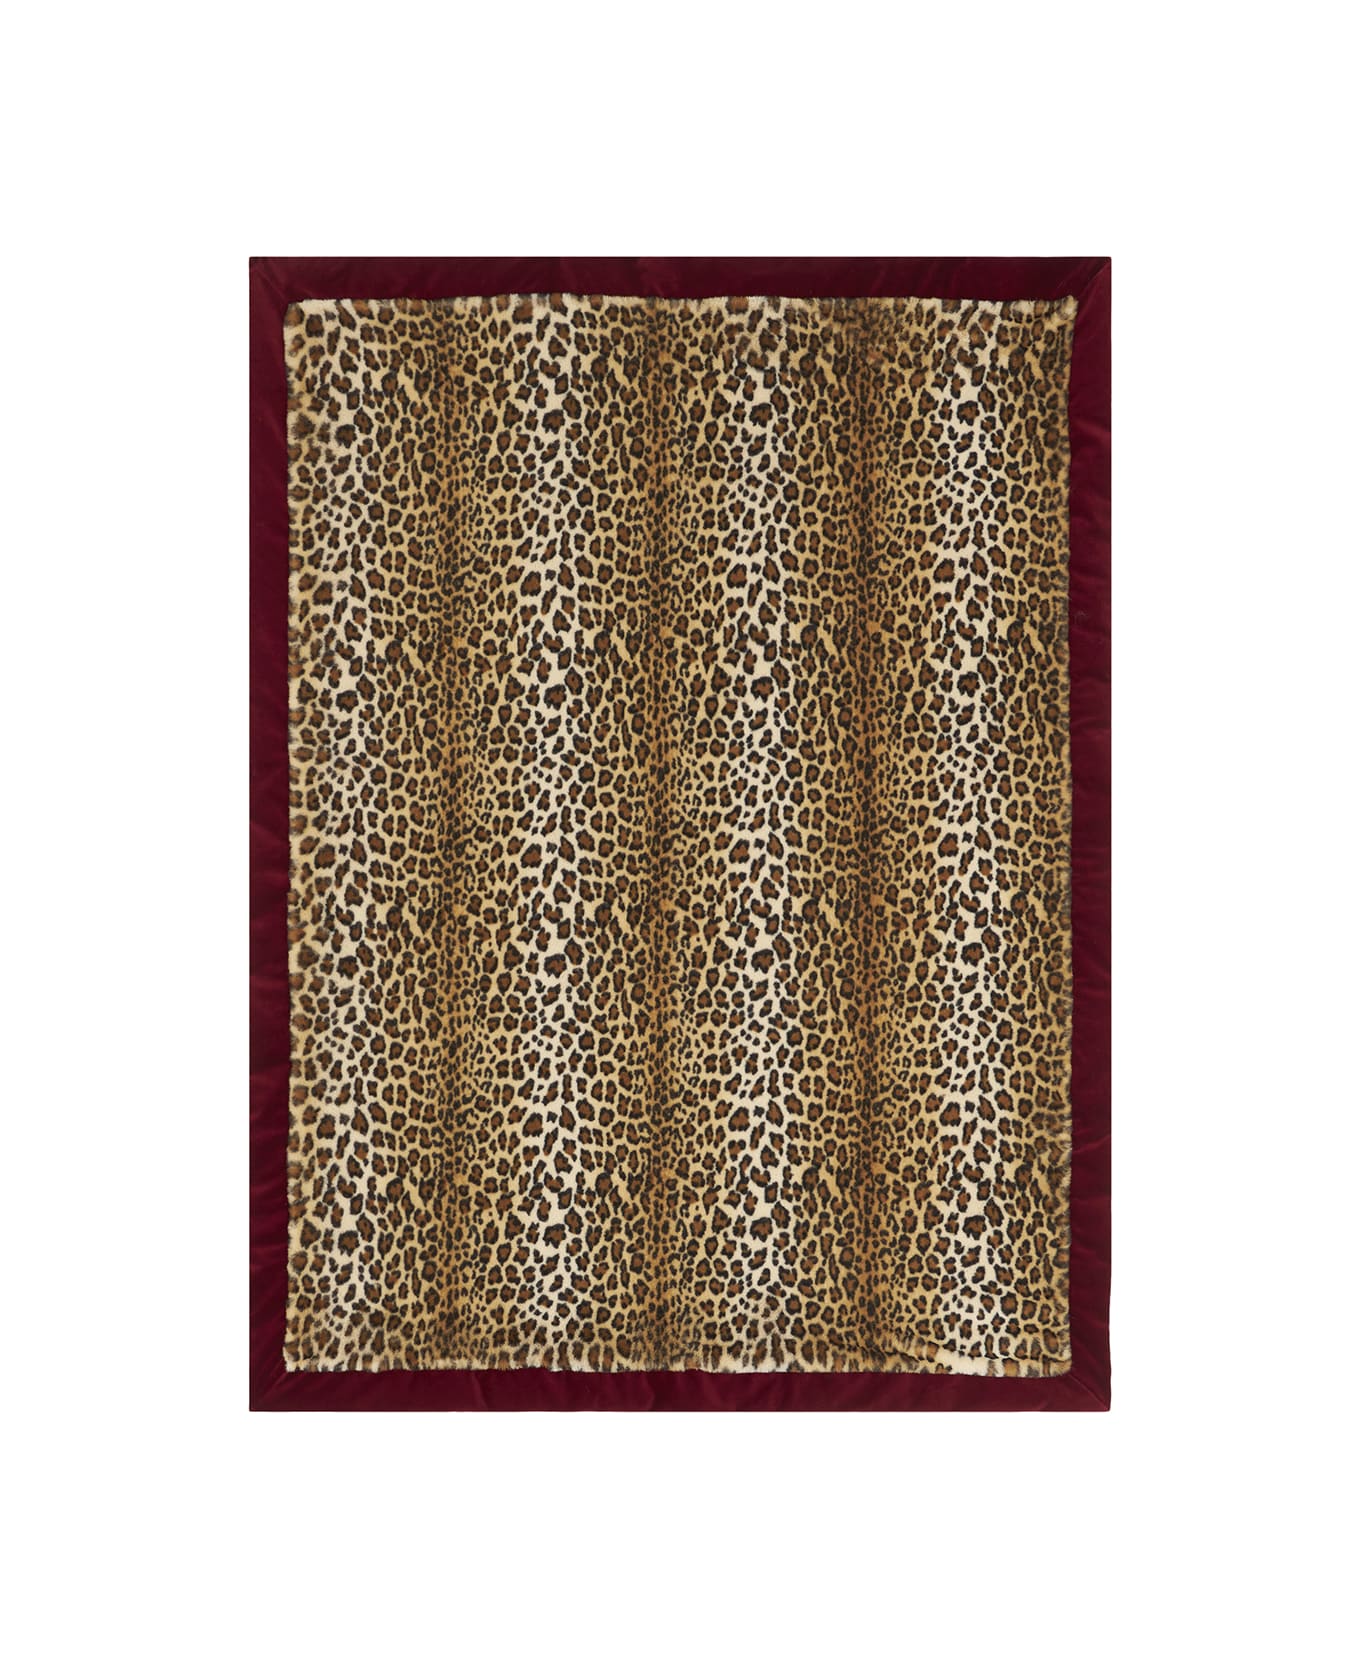 Etro Multicolor Reversible Blanket With Pailsey And Animalier Motif In Fur Home - Brown